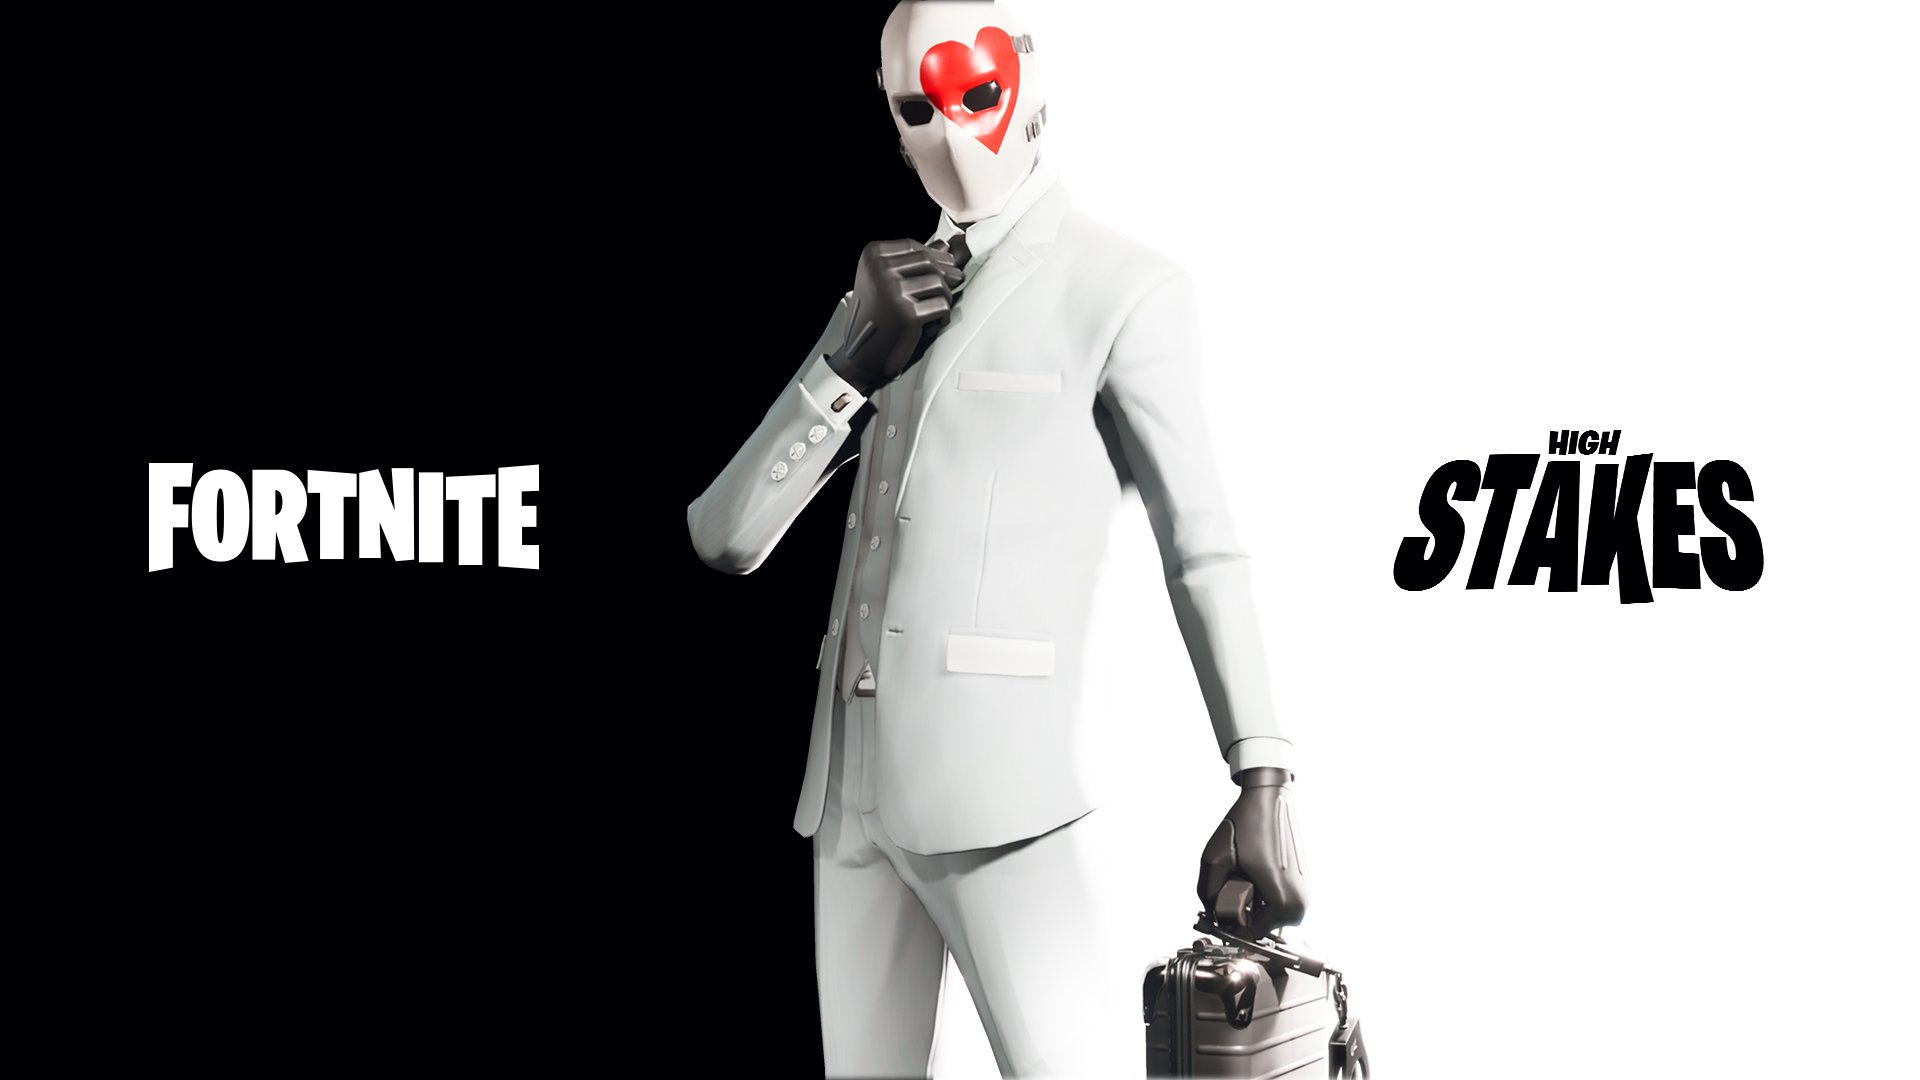 New Fortnite High Stakes Event Gets Announced